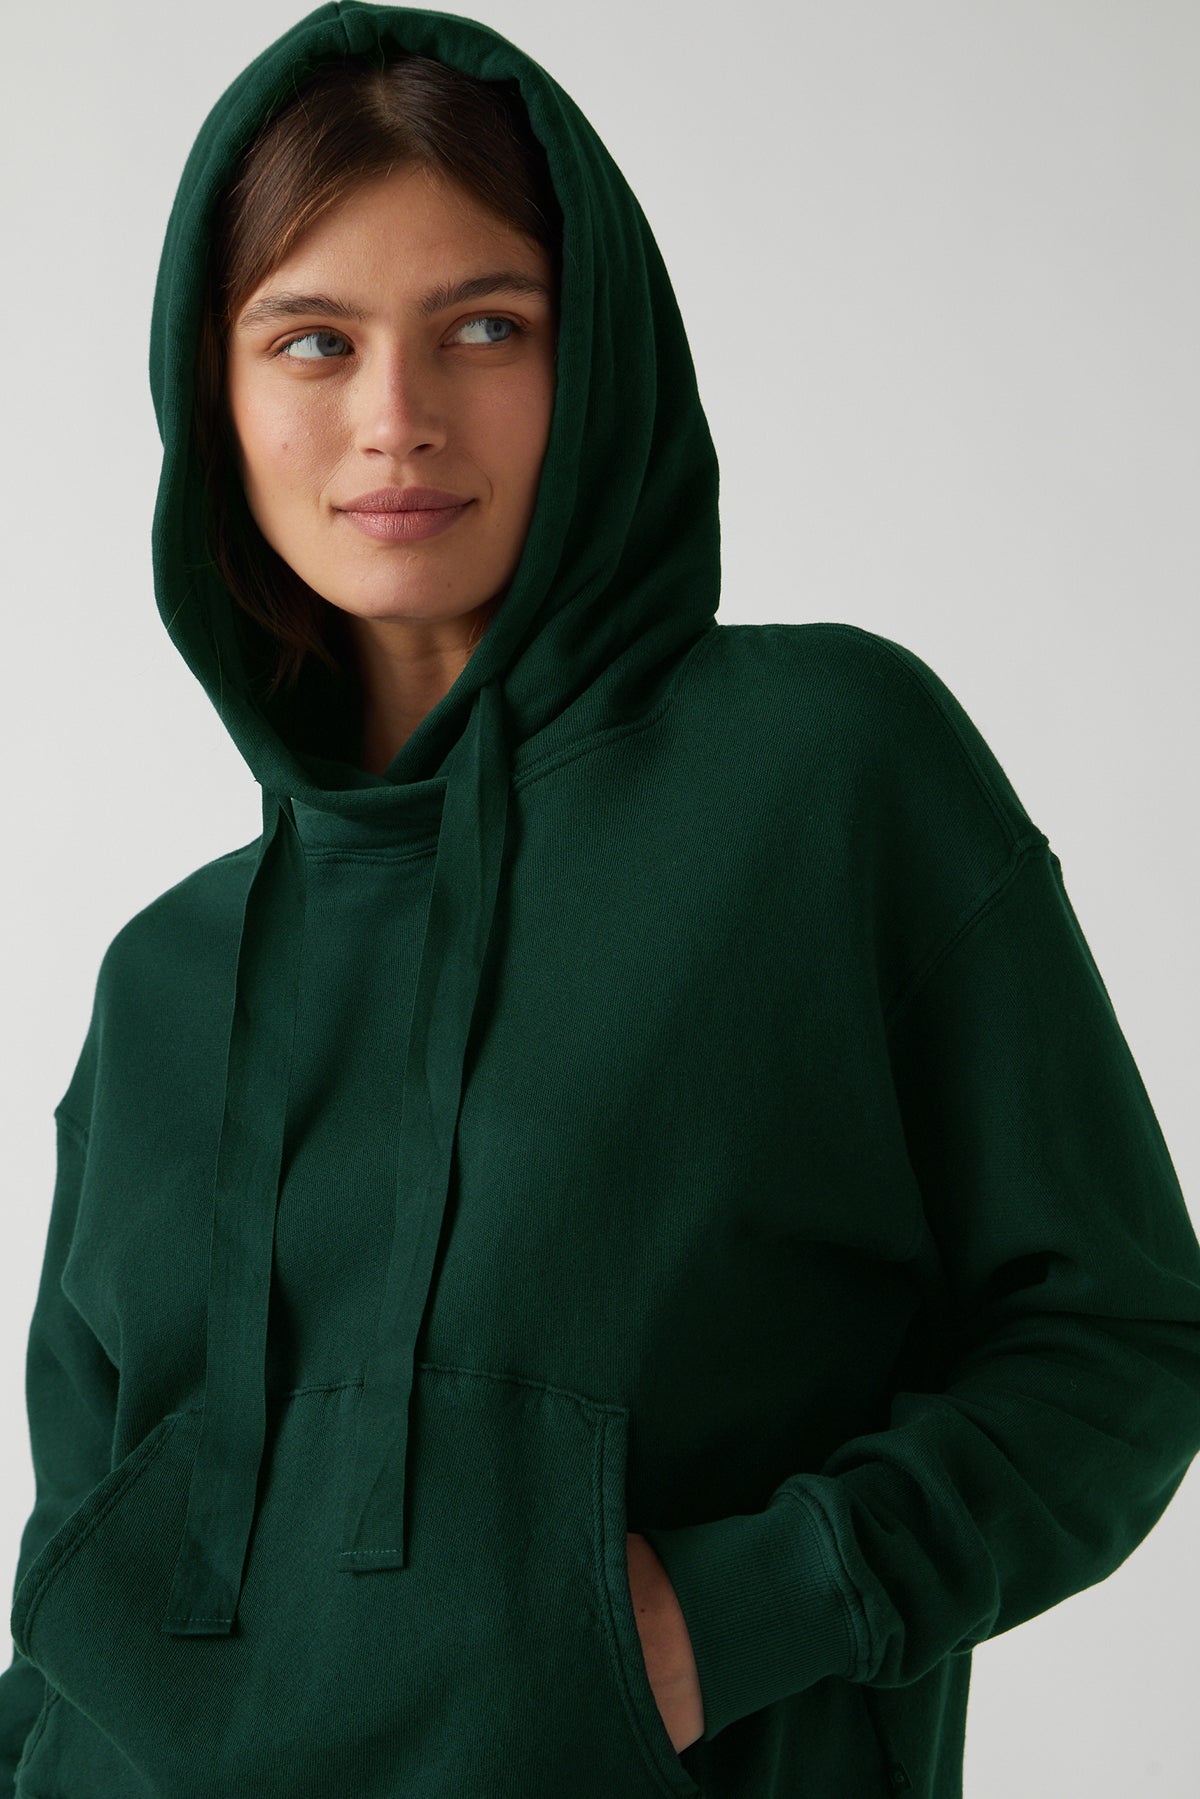 Ojai Hoodie in forest green hood up close up-25483562975425